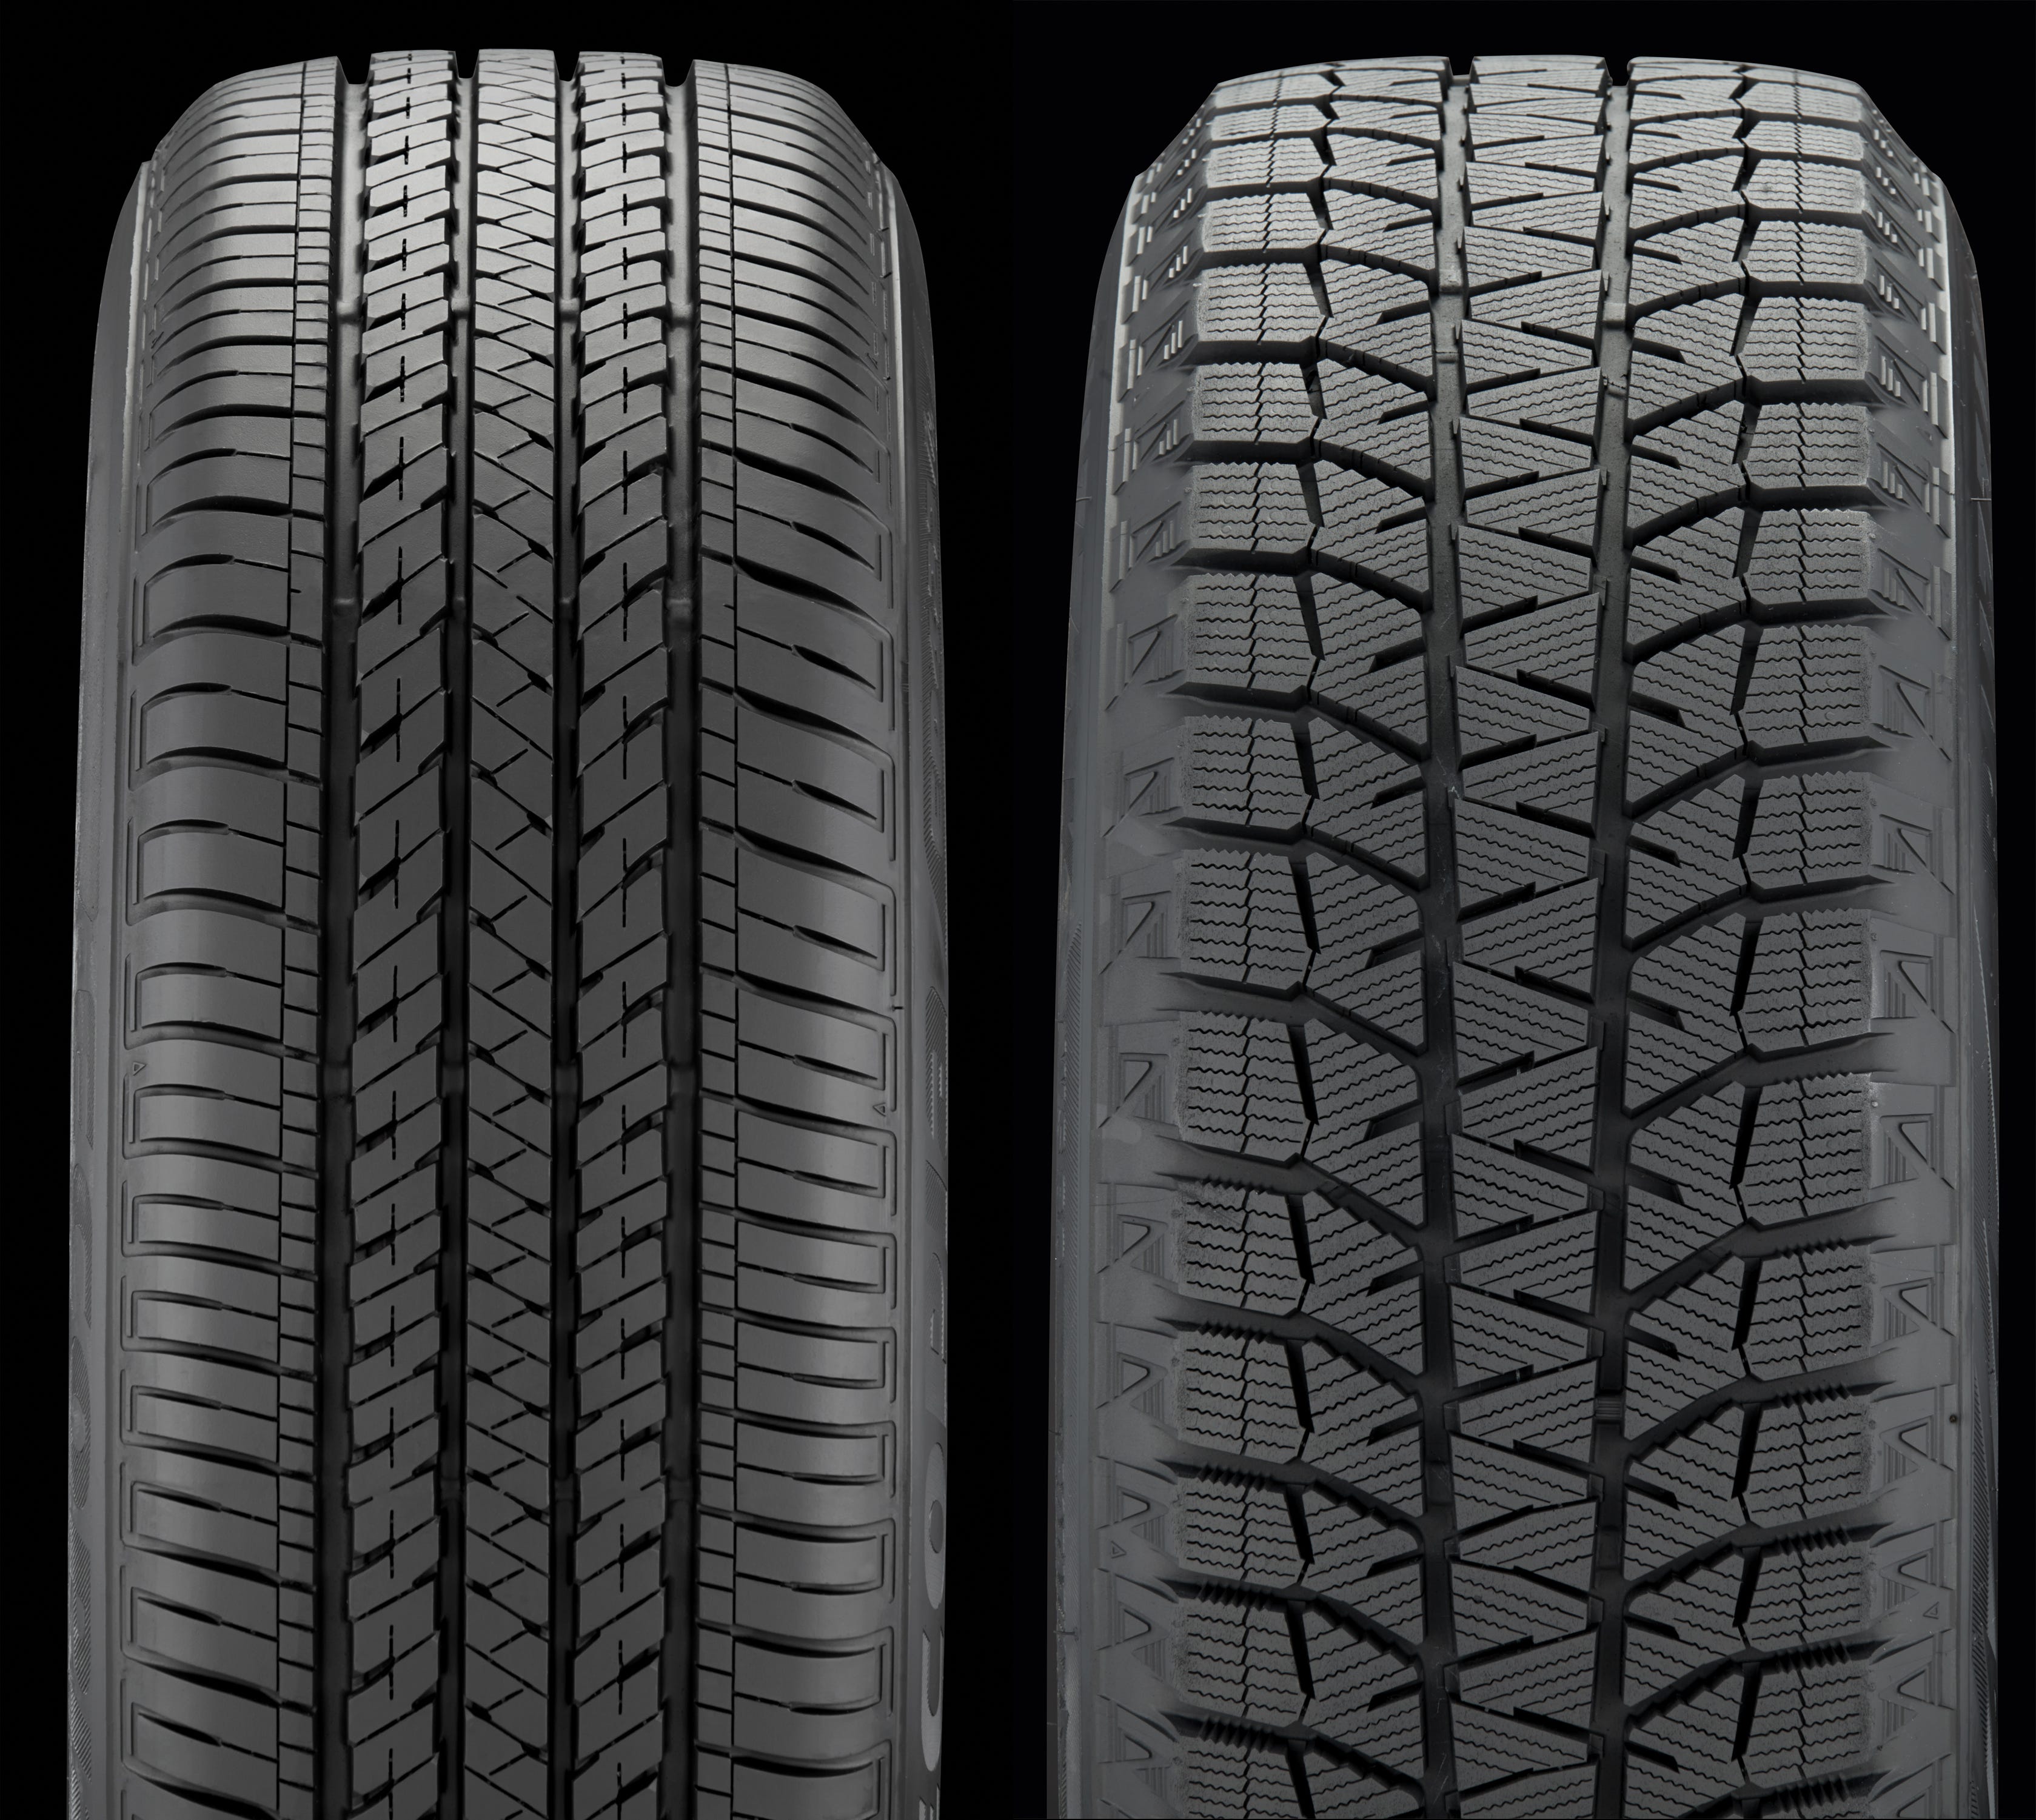 Winter tires make you safer and may cost less than you think